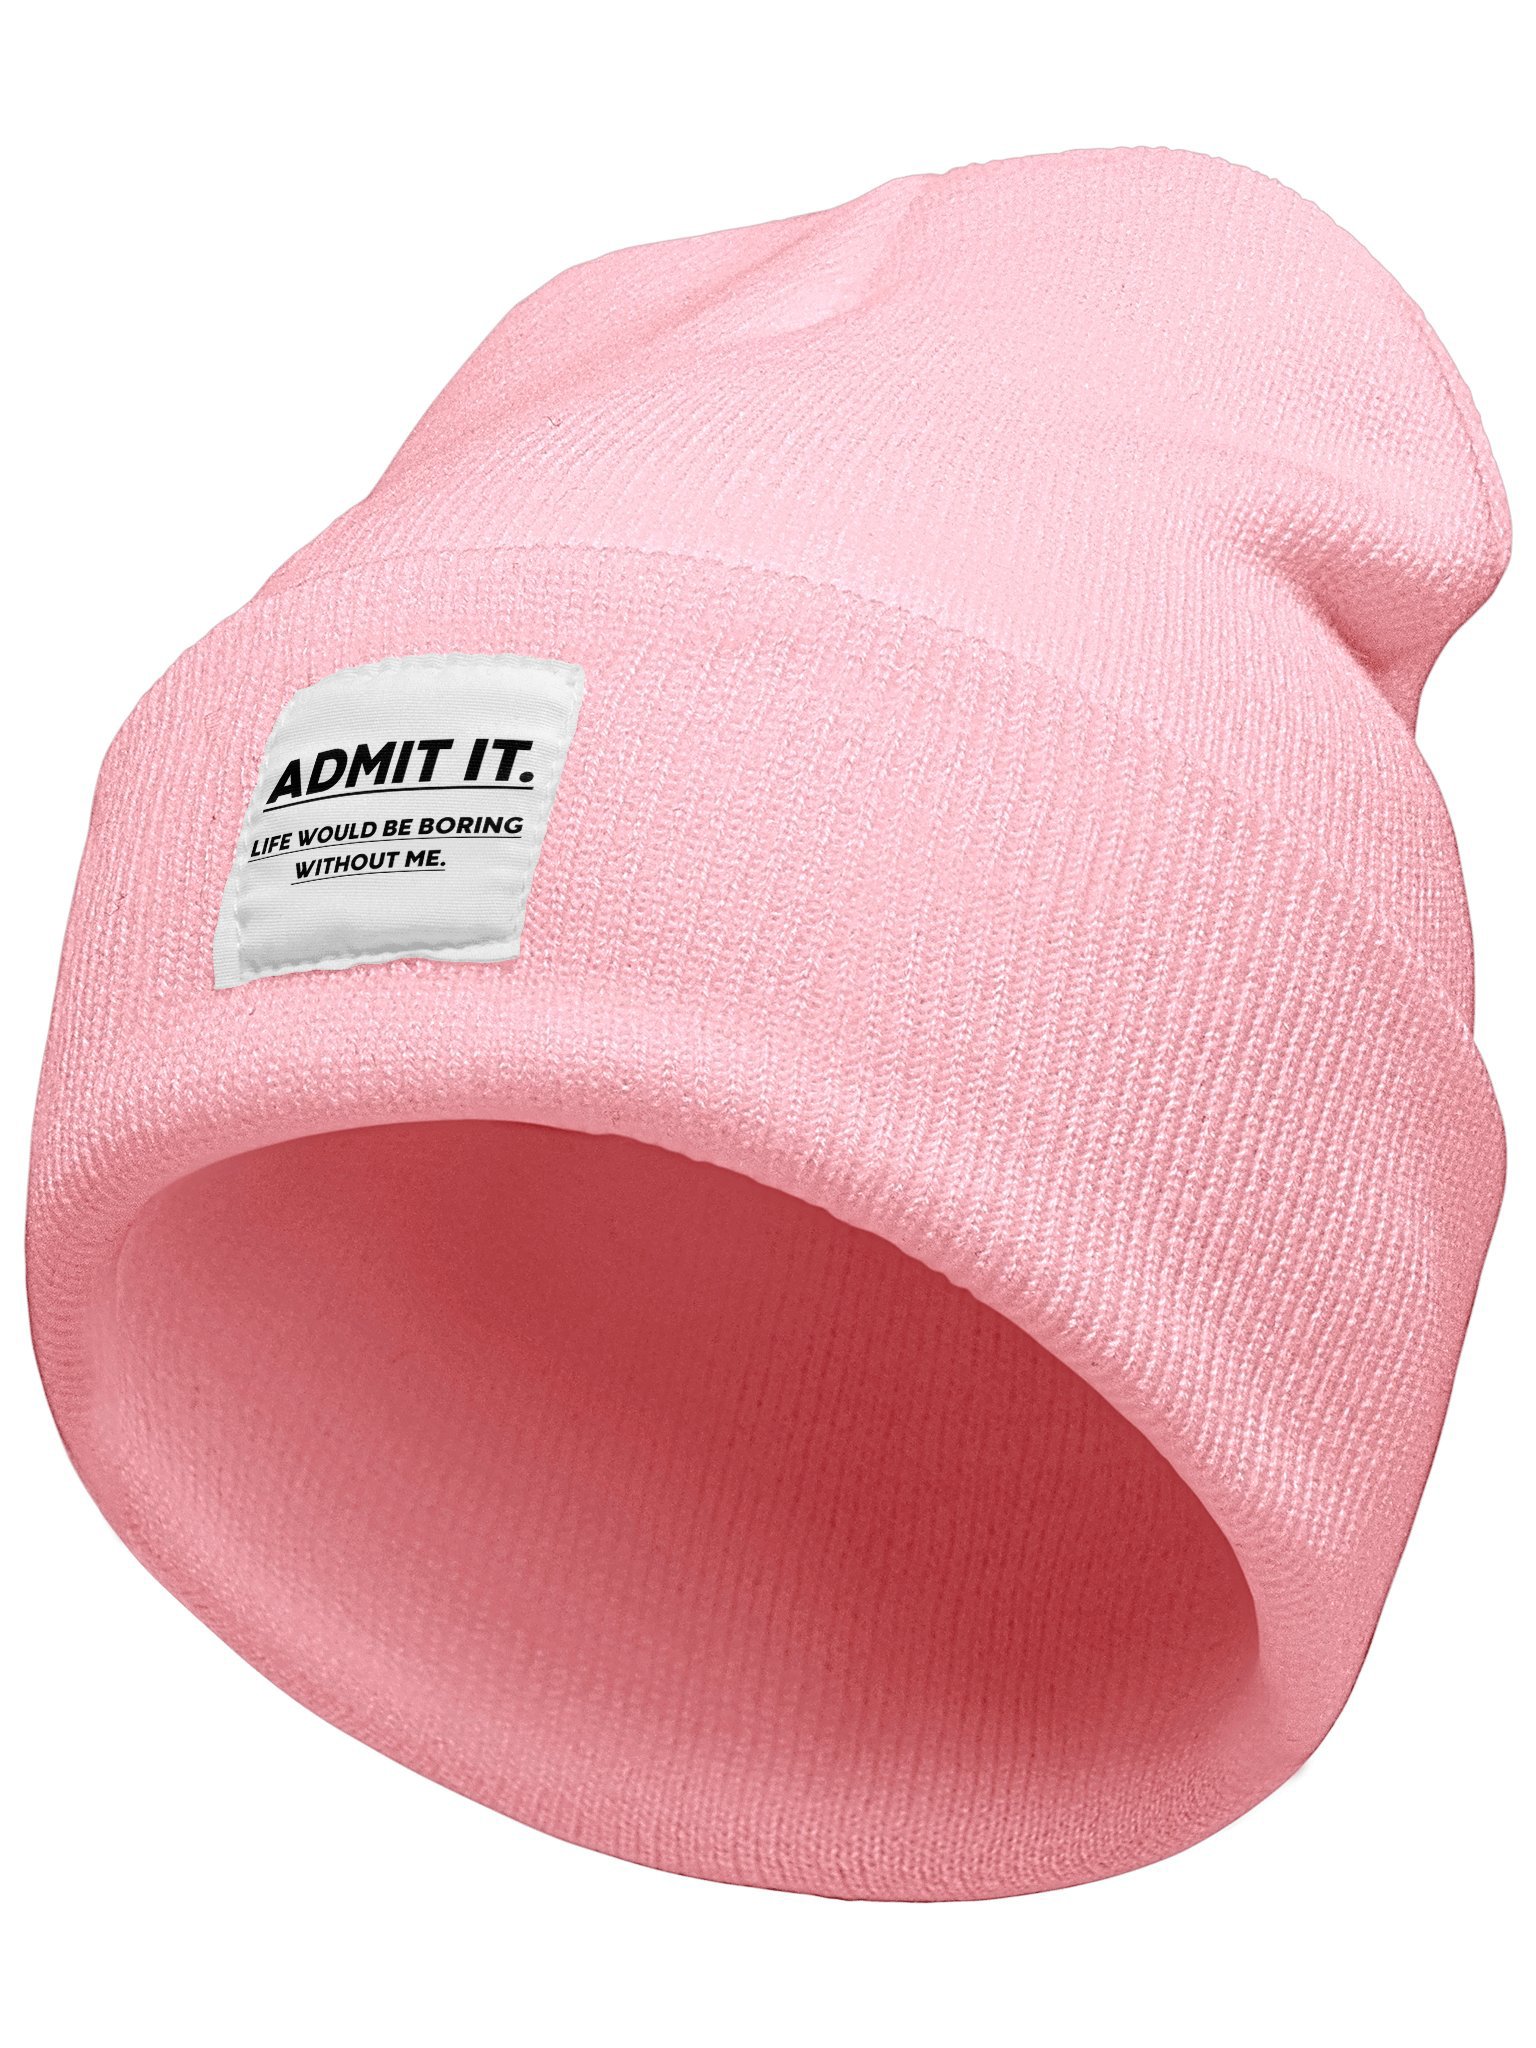 Admit It Life Without Me Would Be Boring Funny Text Letter Beanie Hat